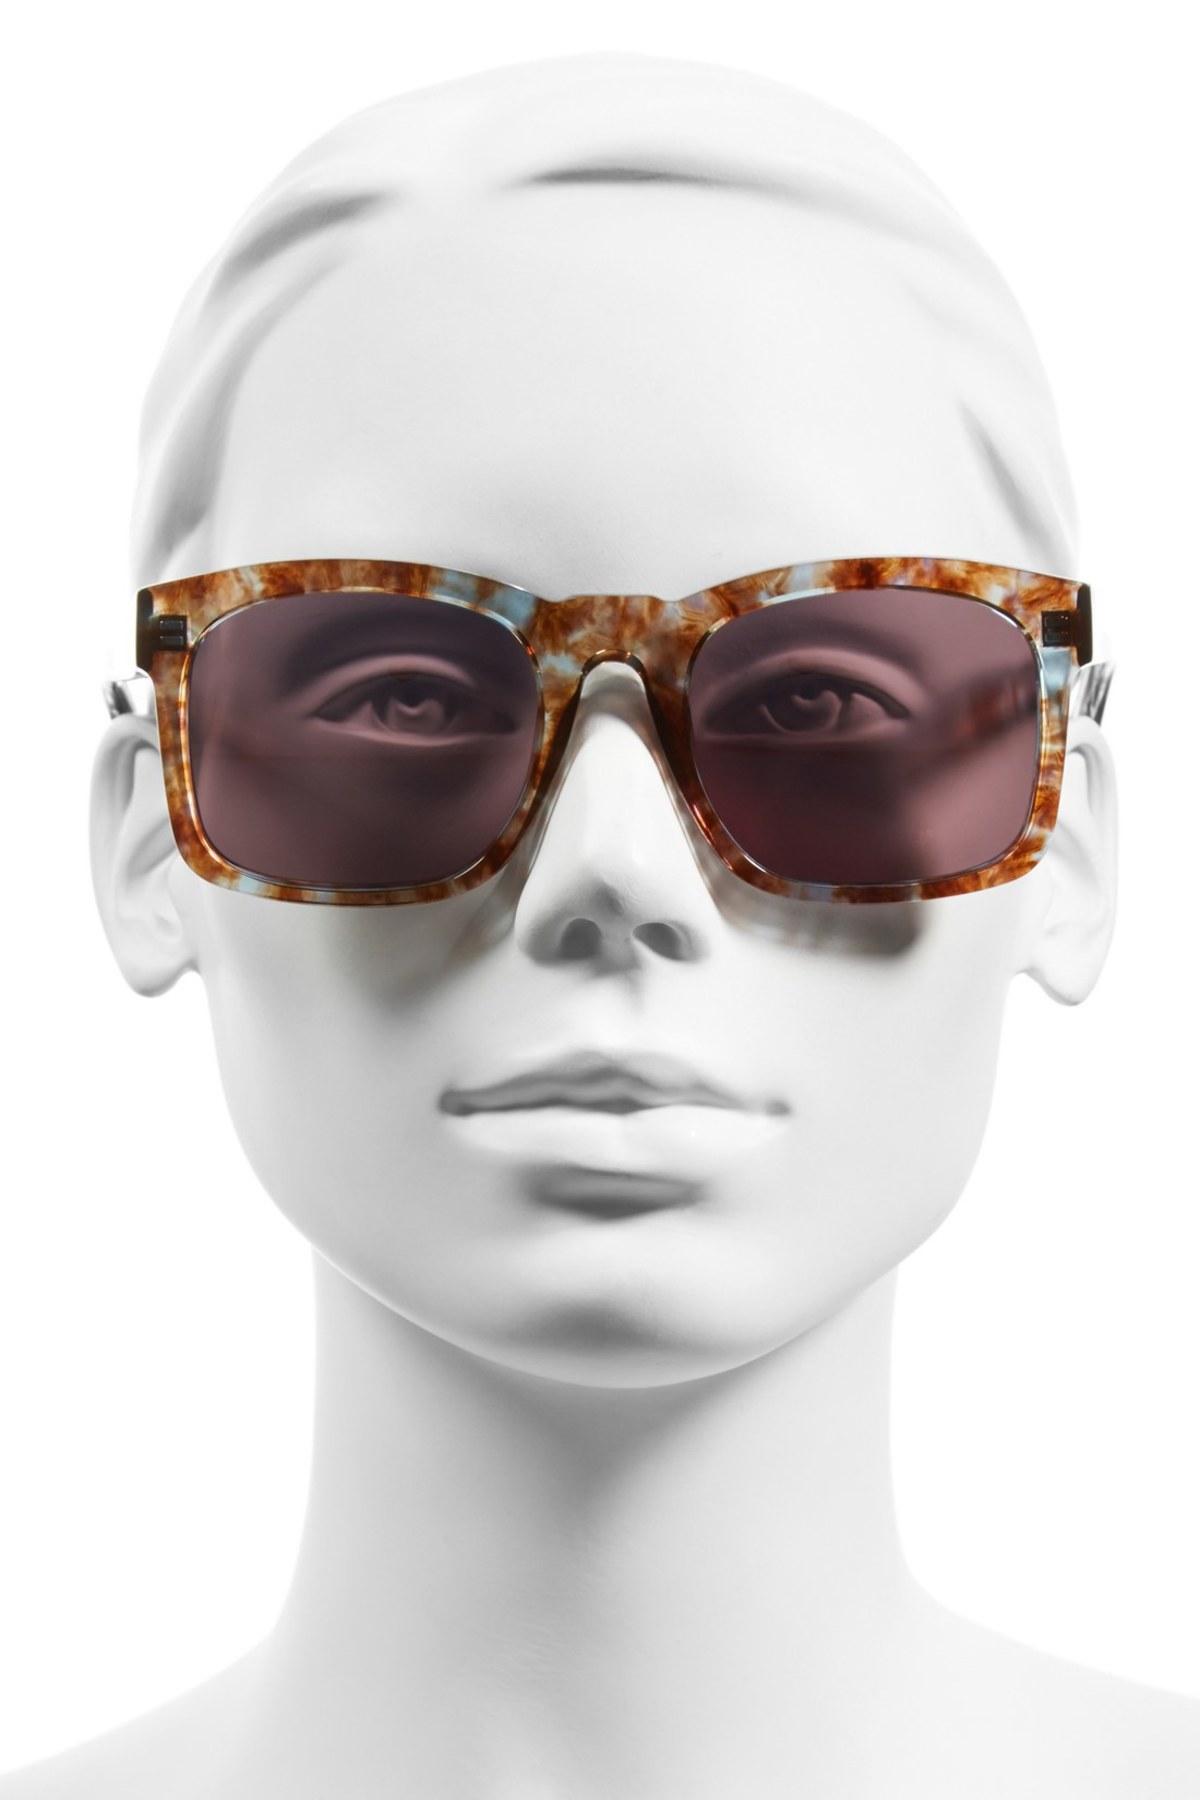 Lyst - Wildfox Women's Gaudy Deluxe Square Acetate Frame Sunglasses